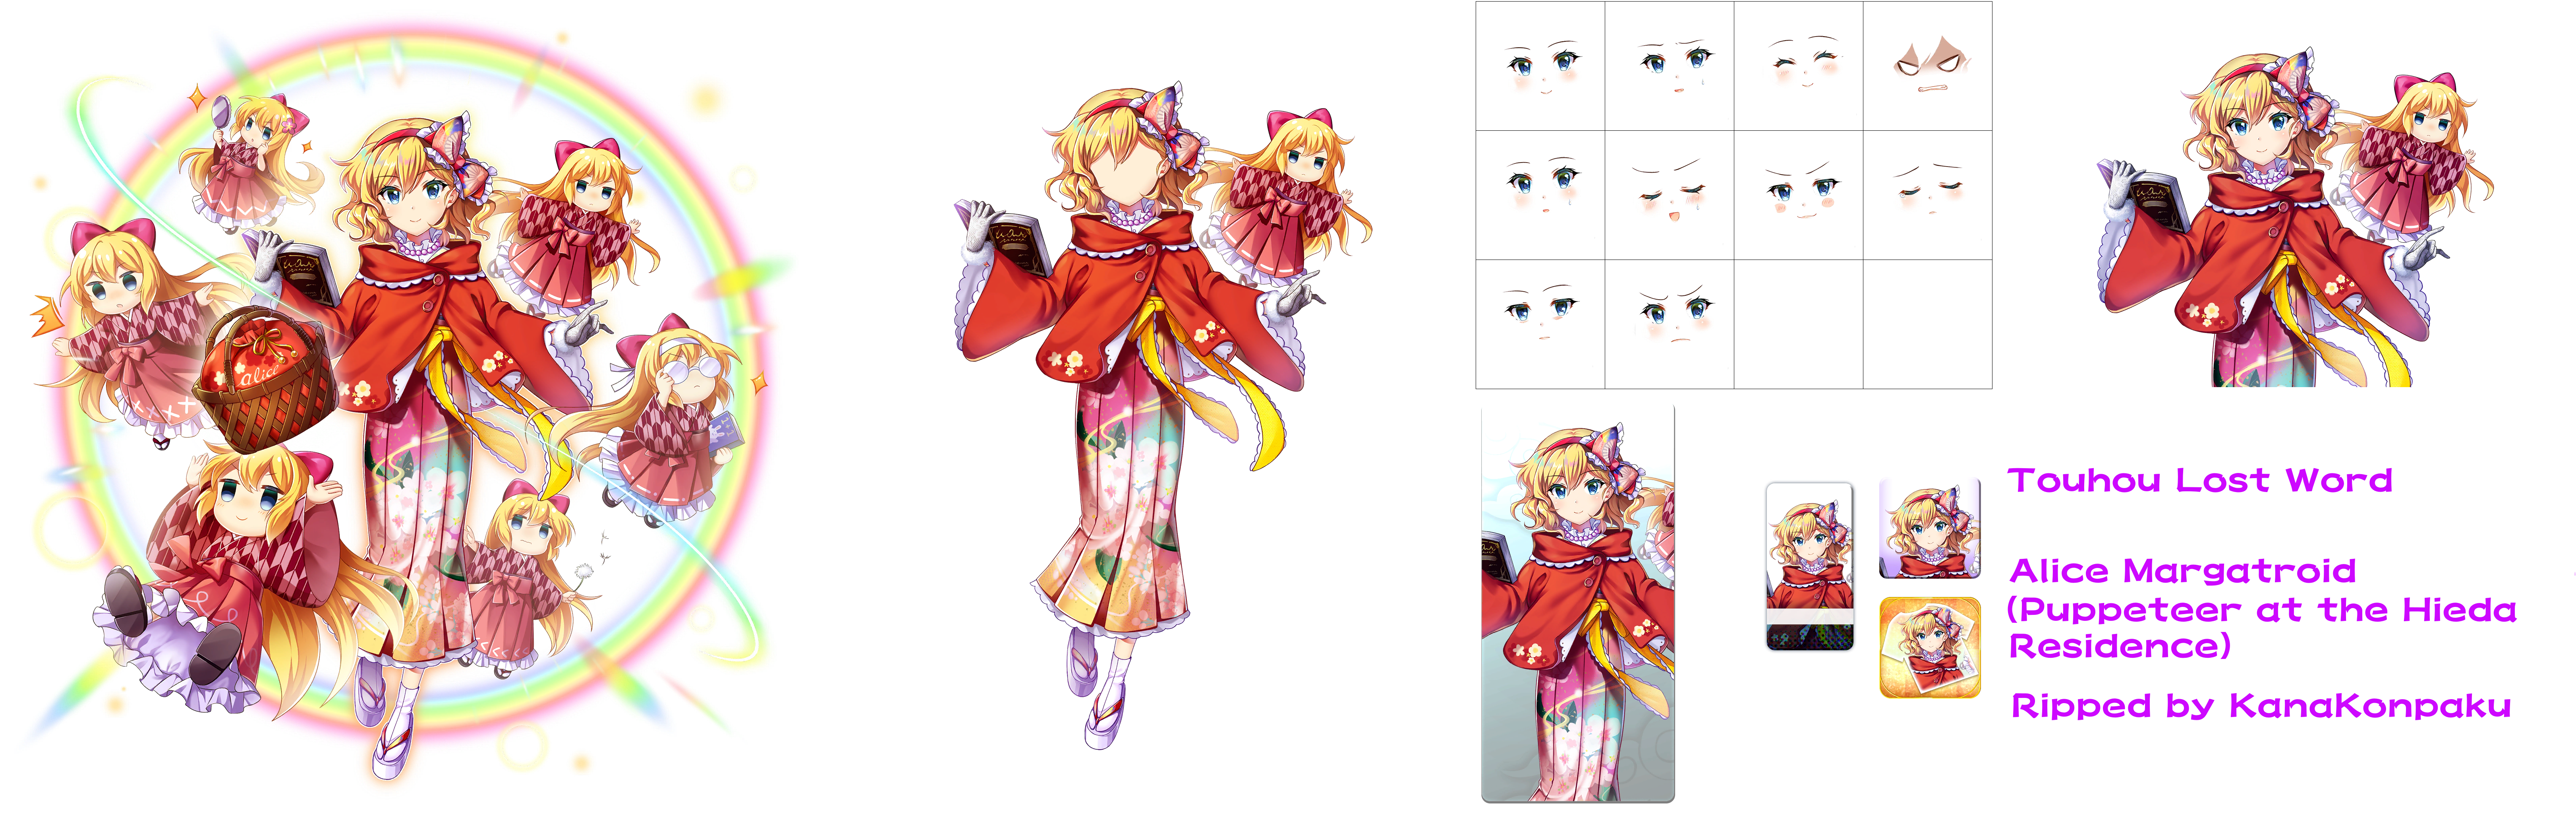 Touhou LostWord - Alice Margatroid (Puppeteer at the Hieda Residence)